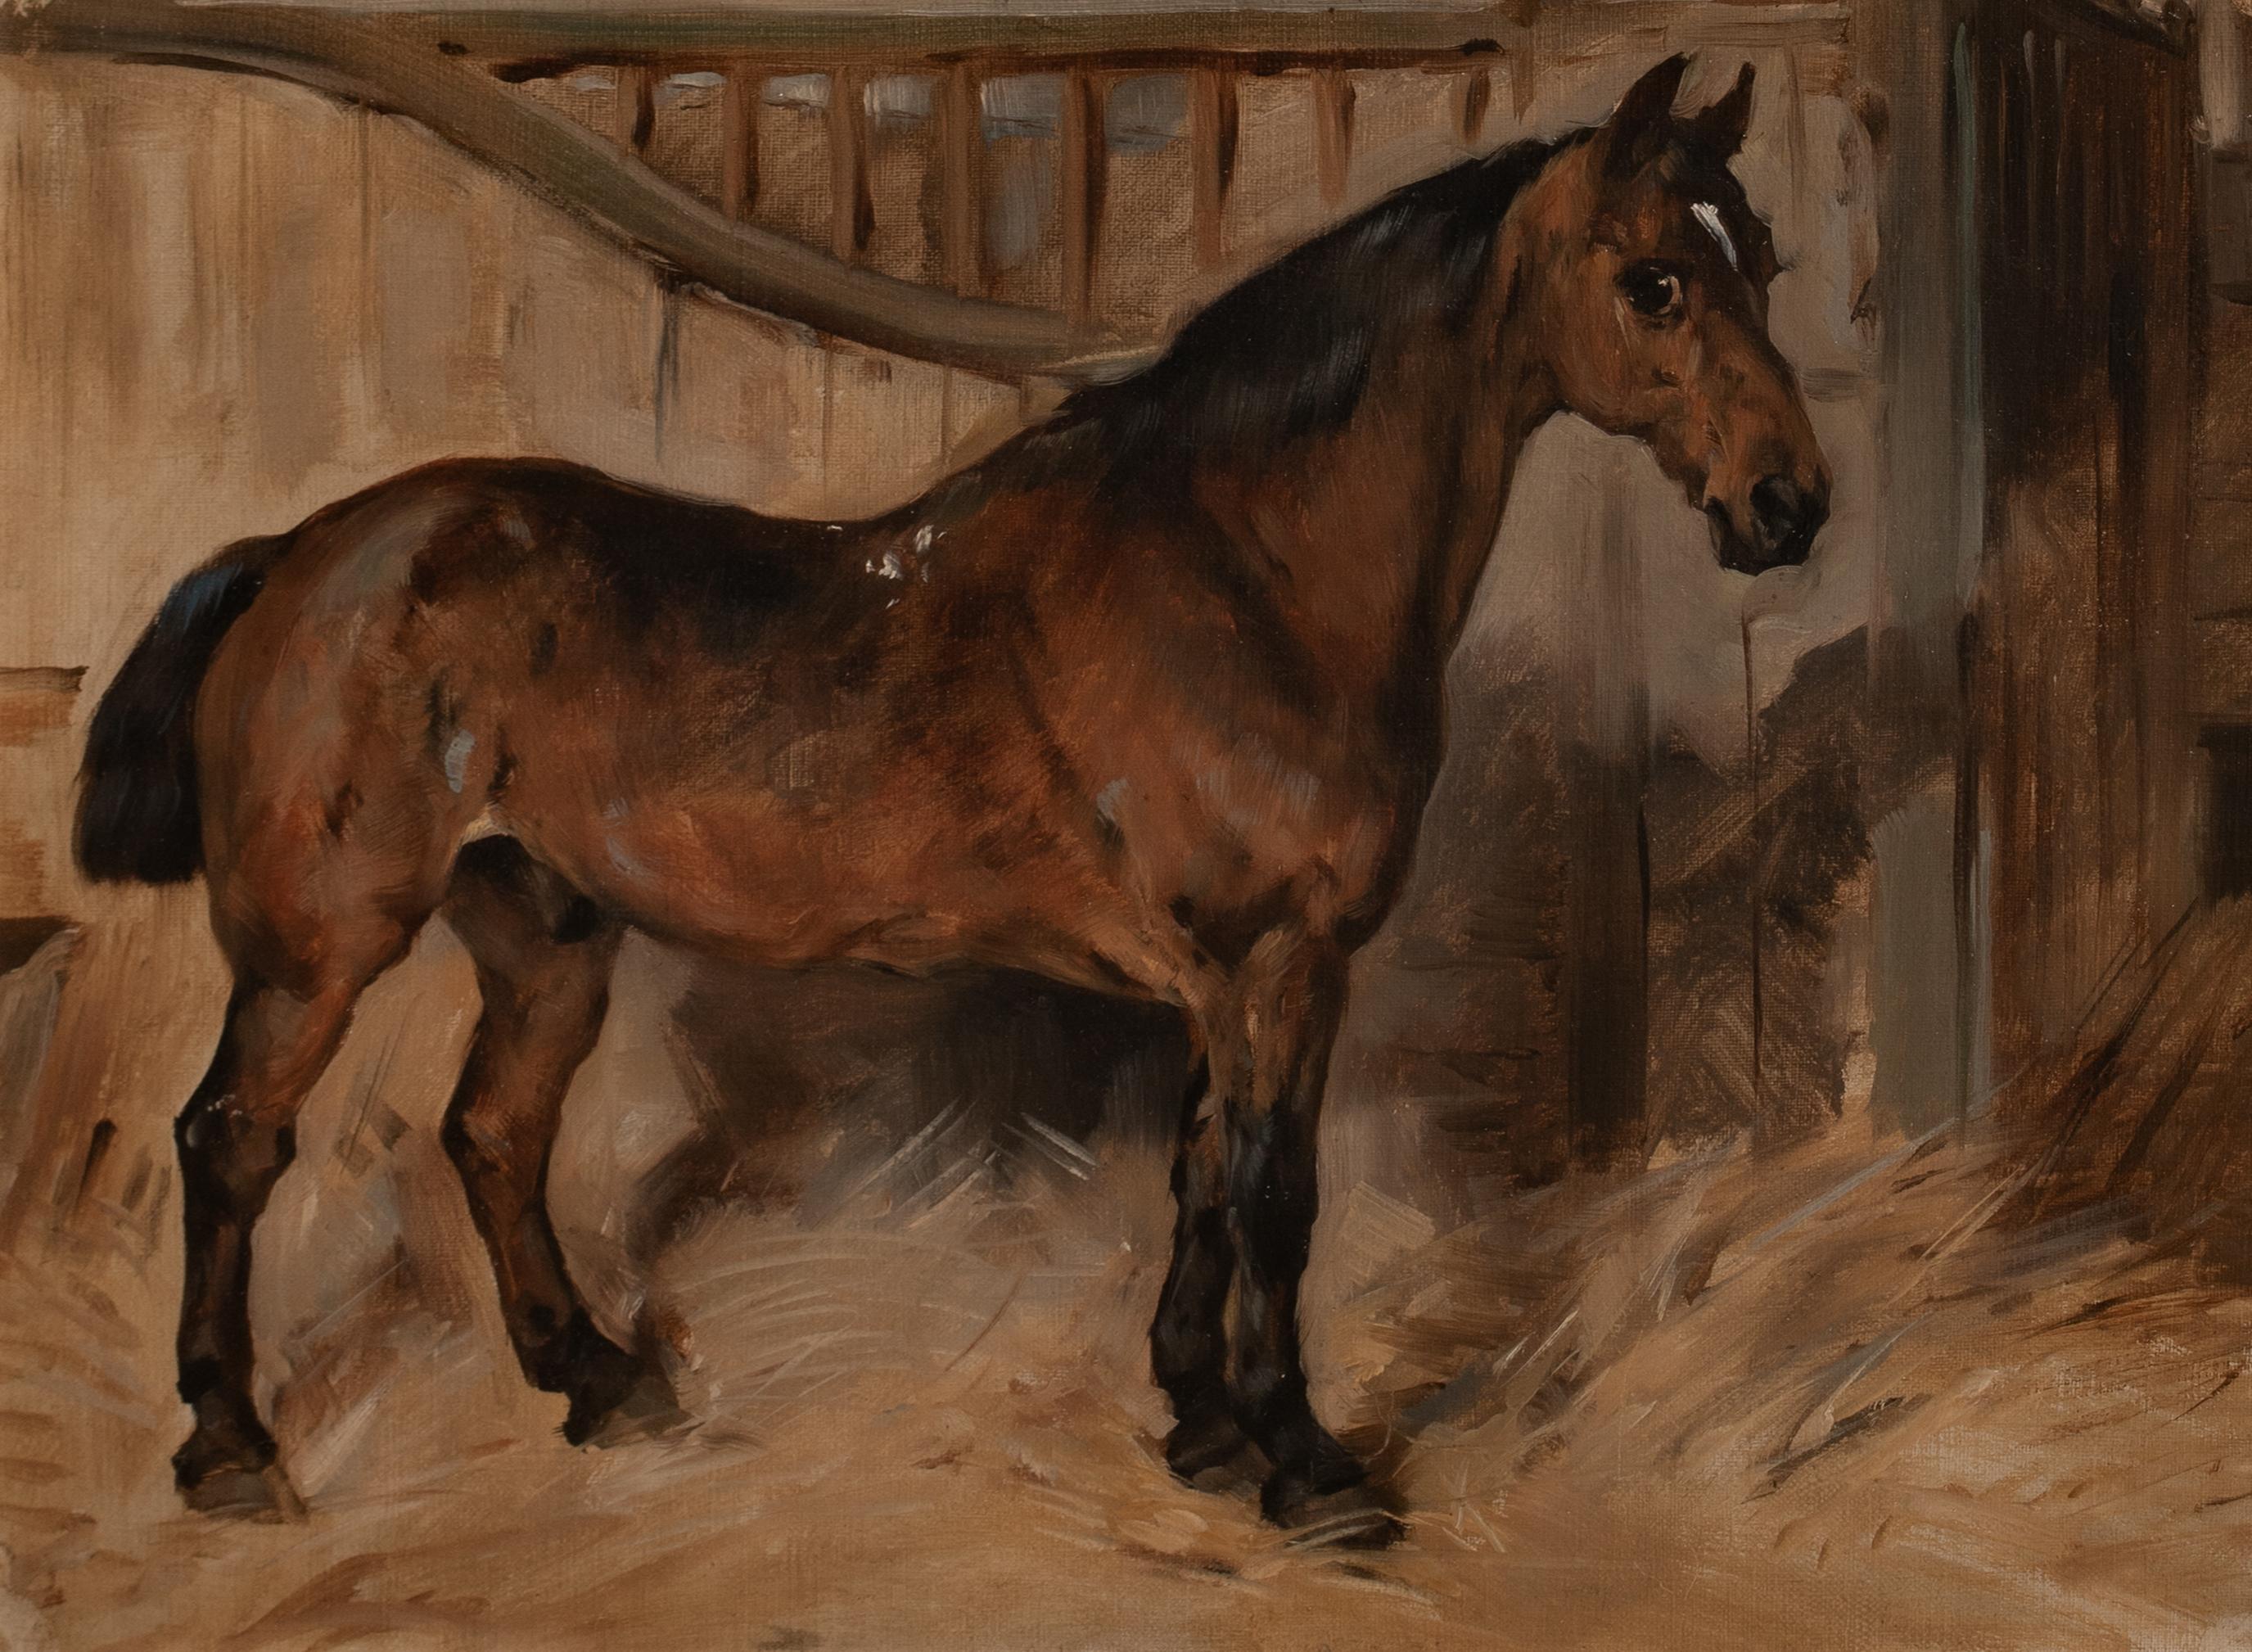 Portrait Of A Bay Carriage Horse, 19th Century

by JOHN EMMS (1843-1912)

Large 19th Century portrait of a bay carriage horse in a loose box, oil on canvas by John Emms. Excellent quality and condition example of the famous animal painters work